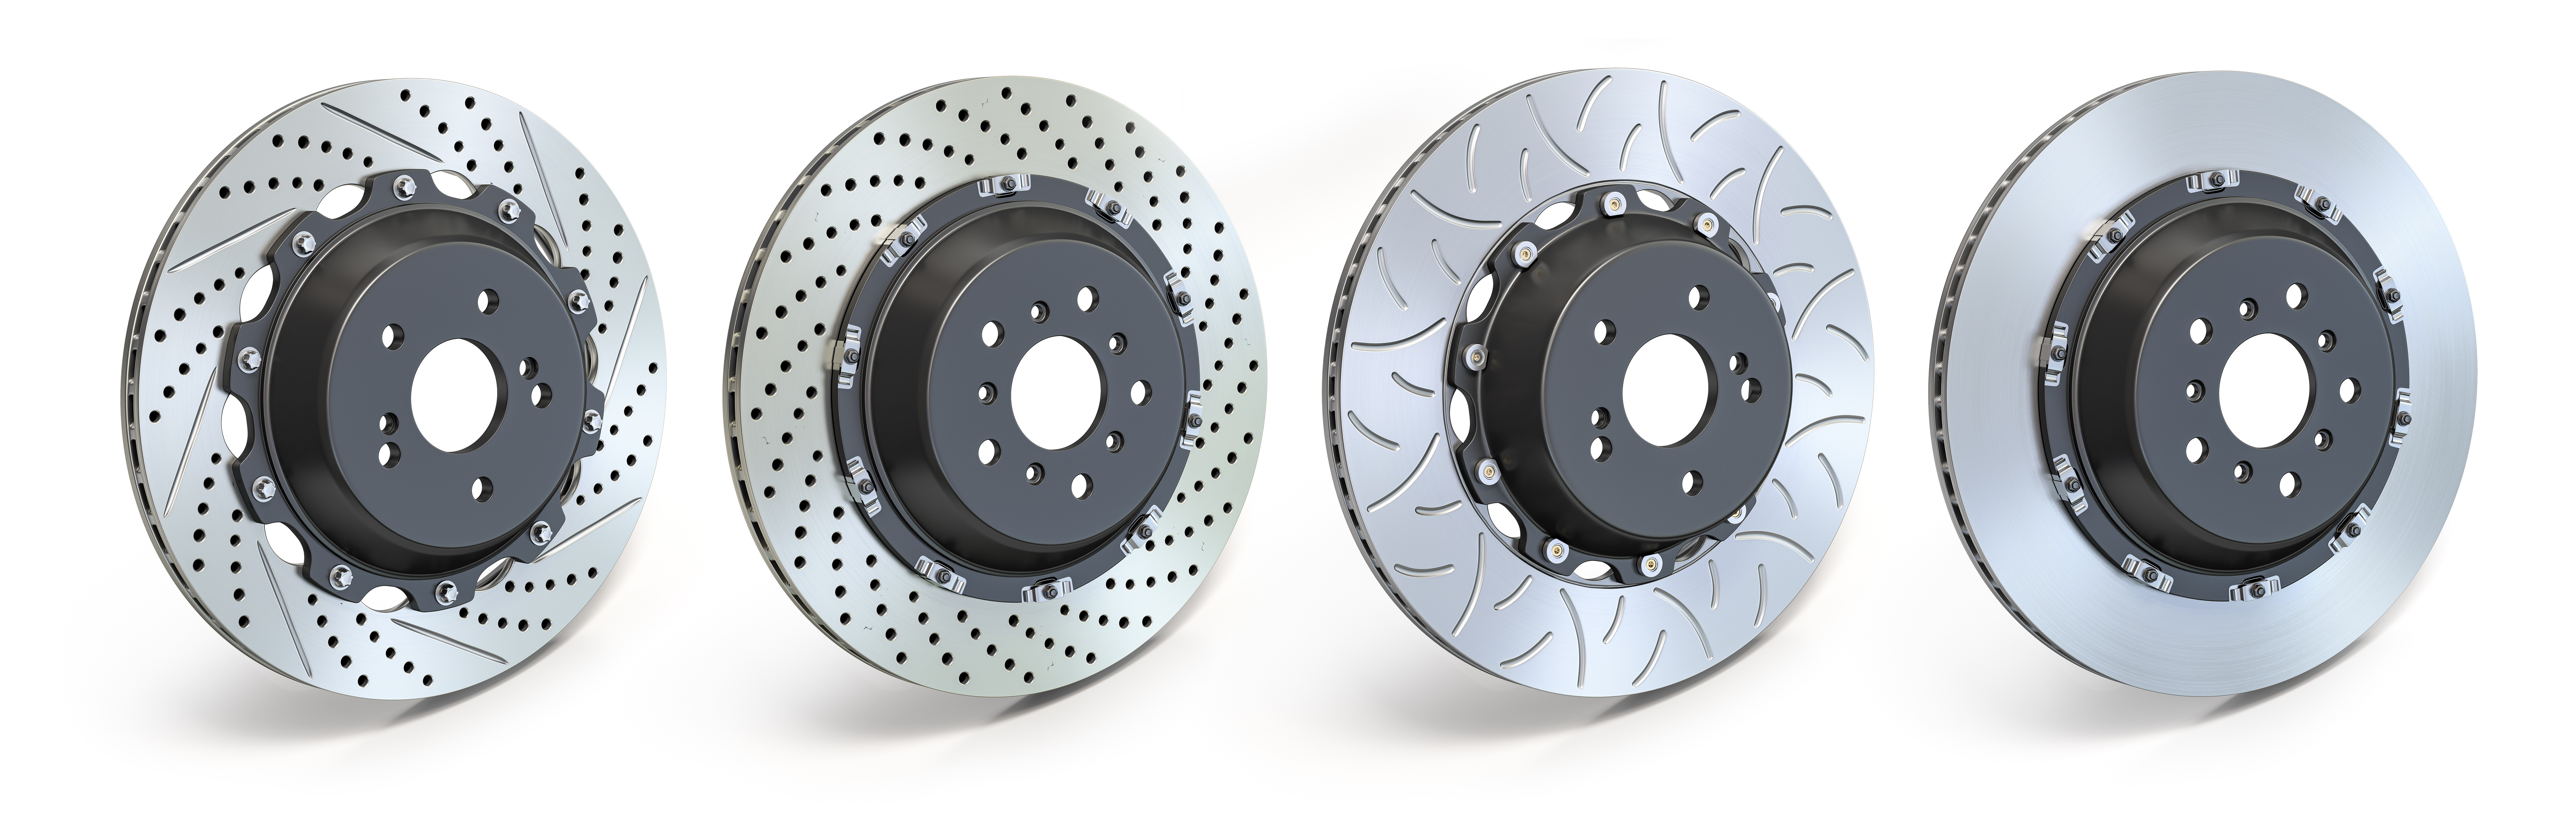 Different types of brakes